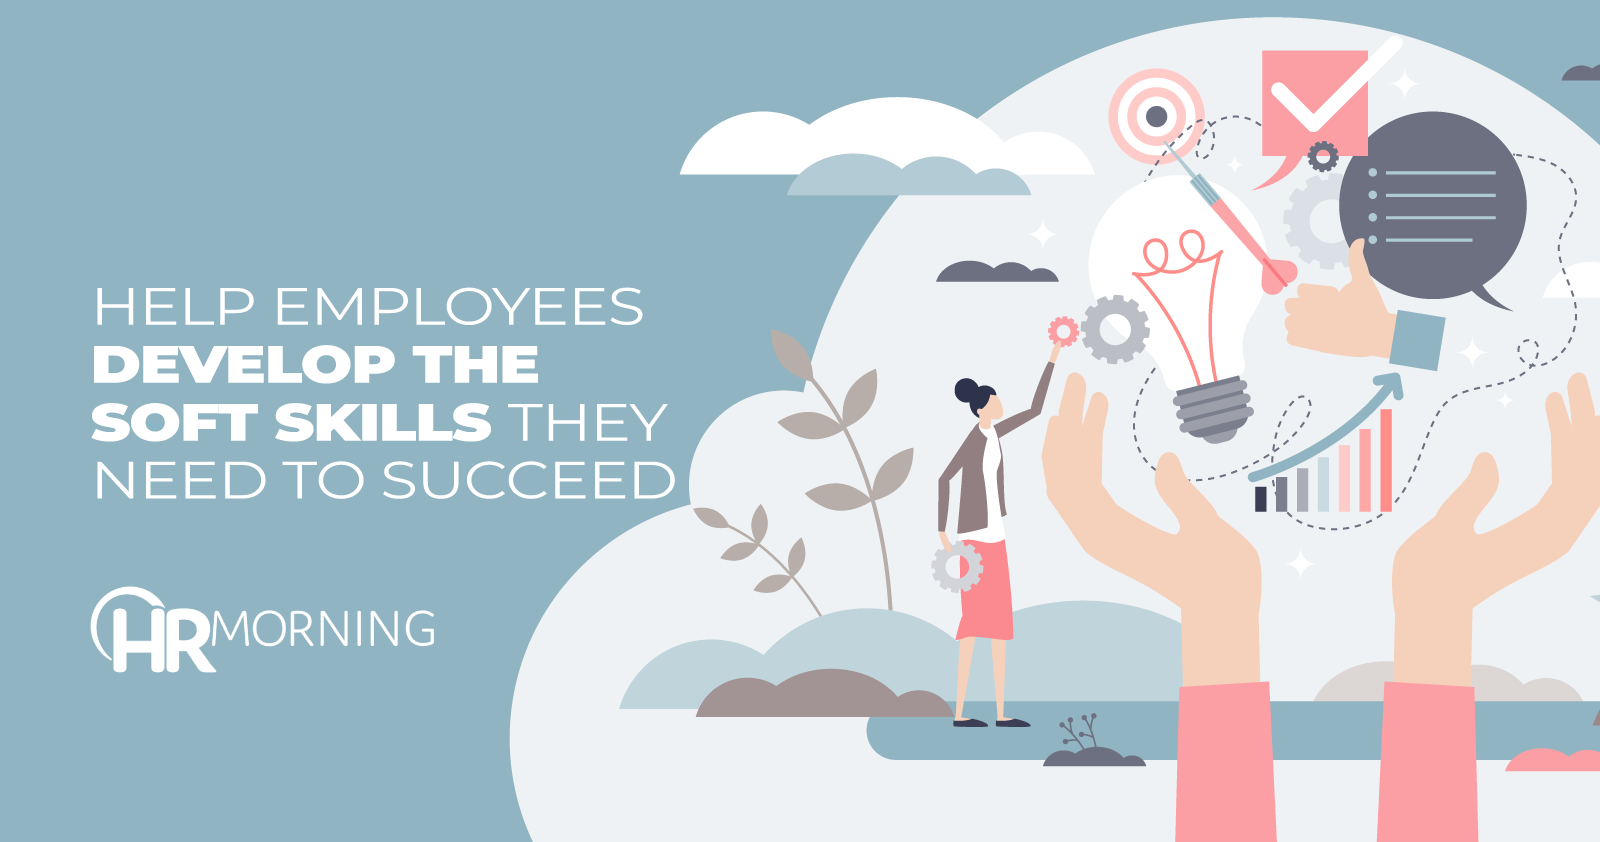 Help employees develop the soft skills they need to succeed